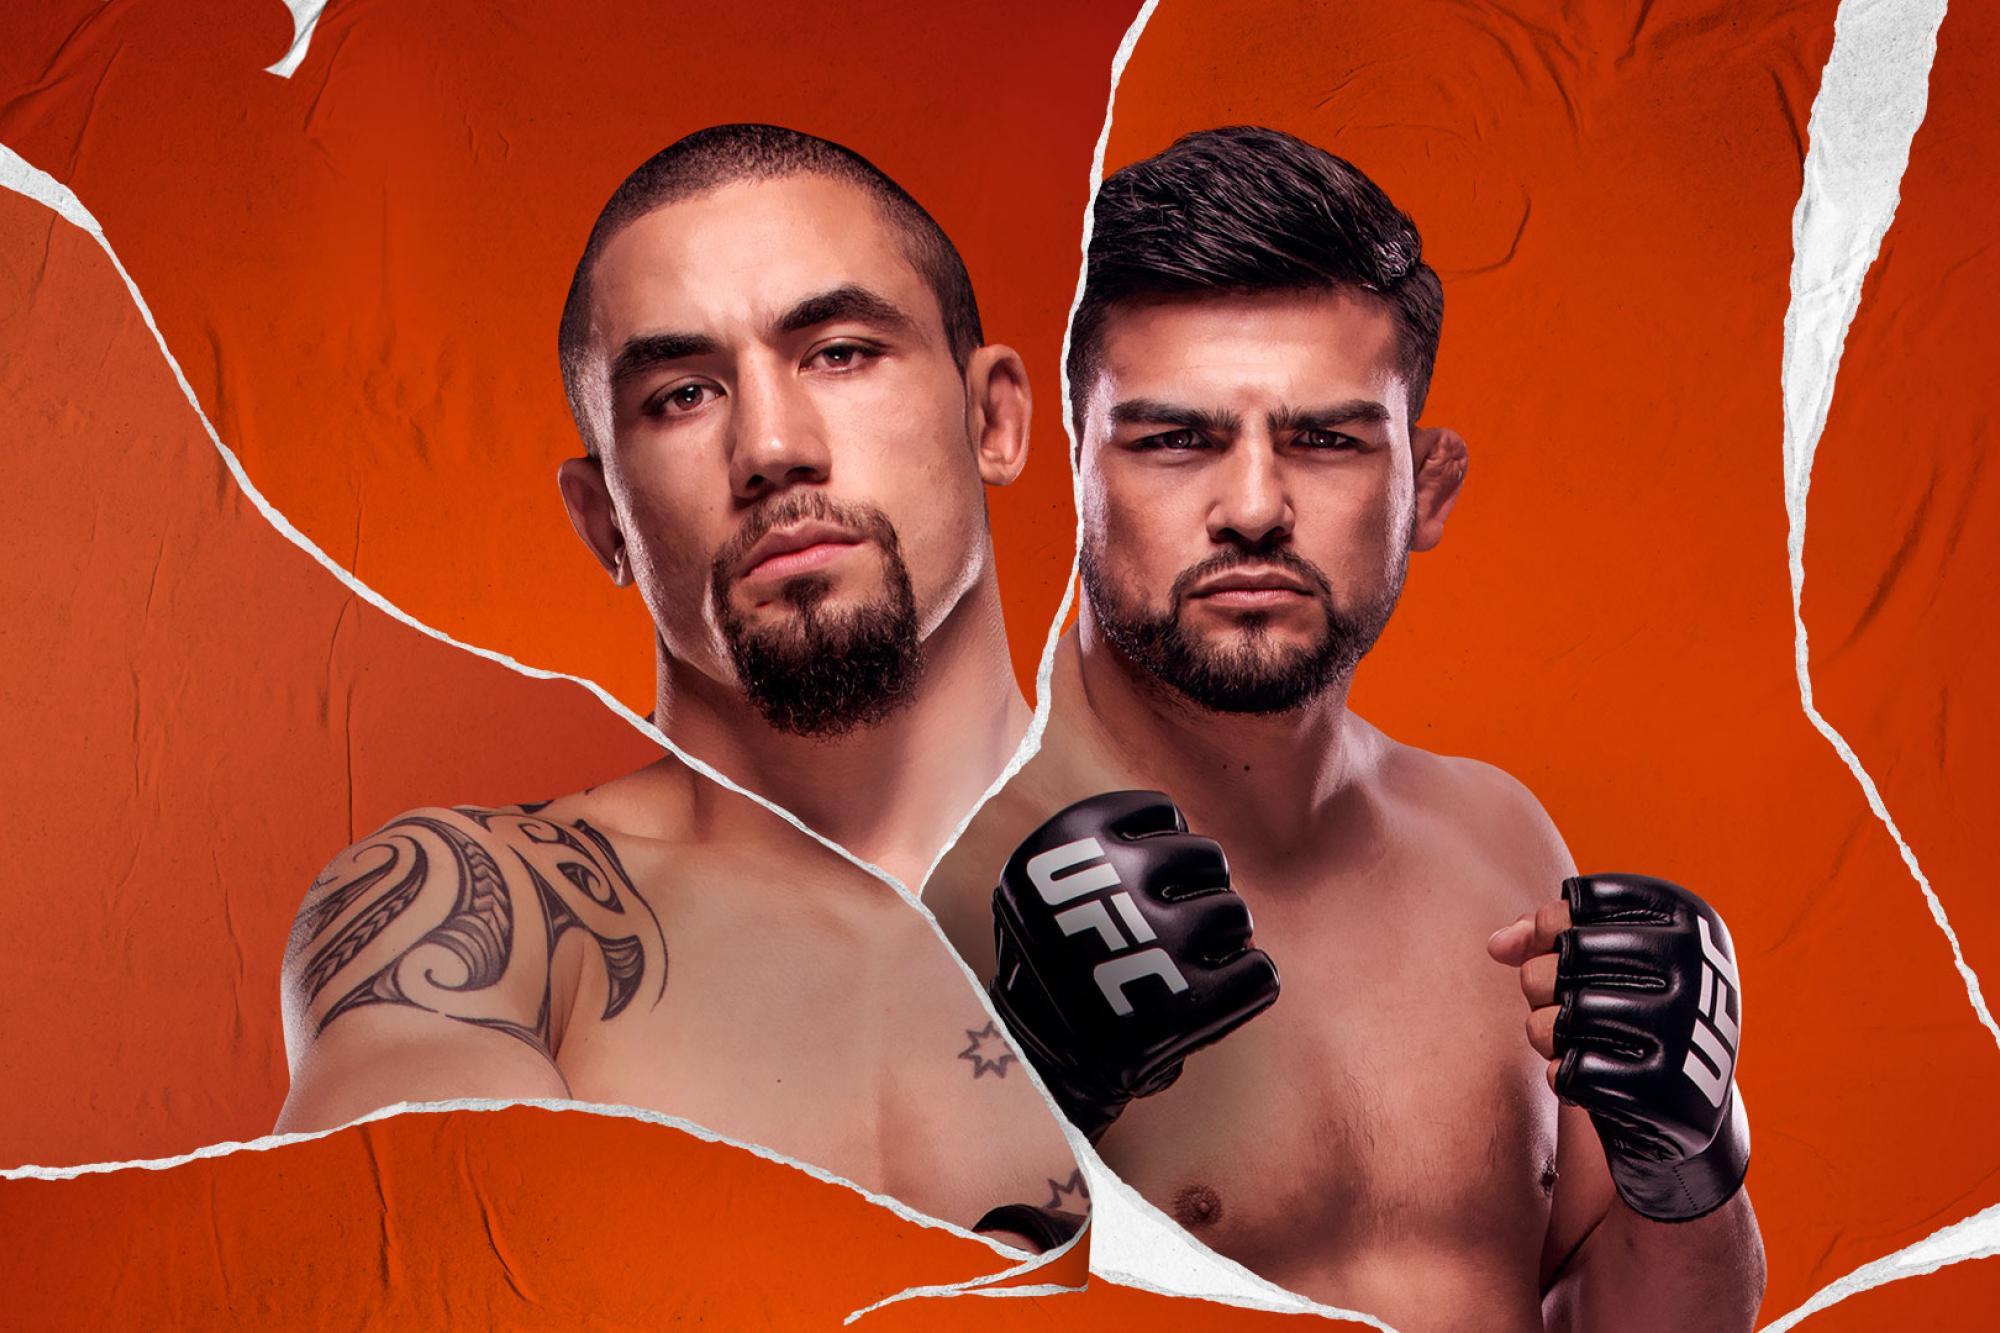 How to Watch UFC Fight Night: Whittaker vs. Gastelum on April 17